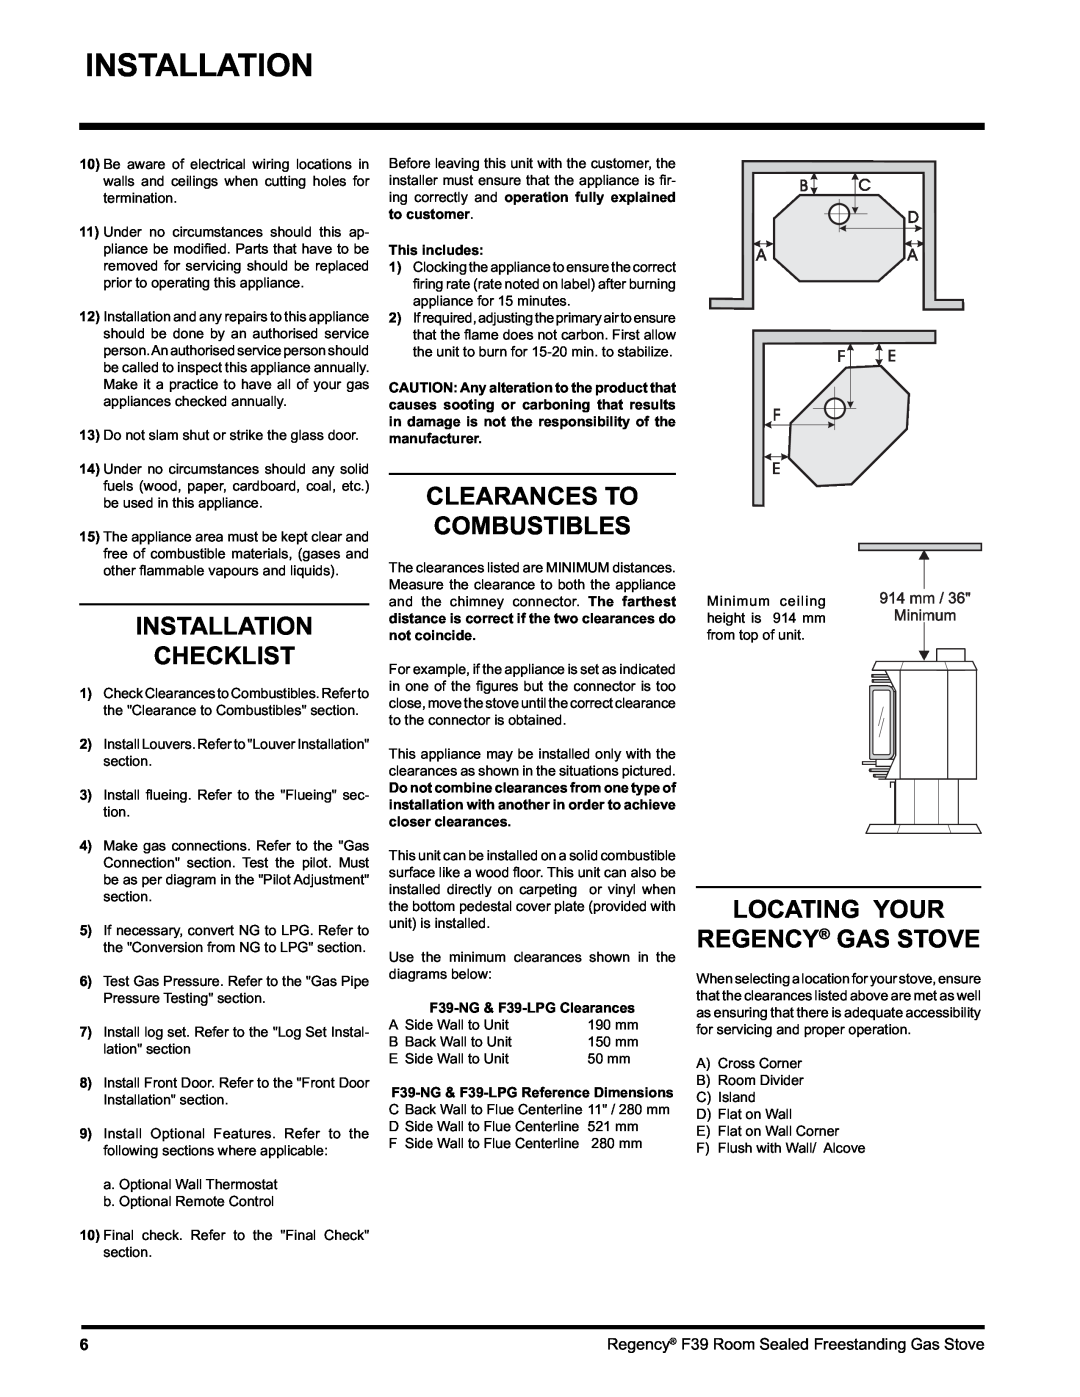 Regency F39-NG, F39-LPG Installation Checklist, Clearances To Combustibles, Locating Your Regency Gas Stove, This includes 